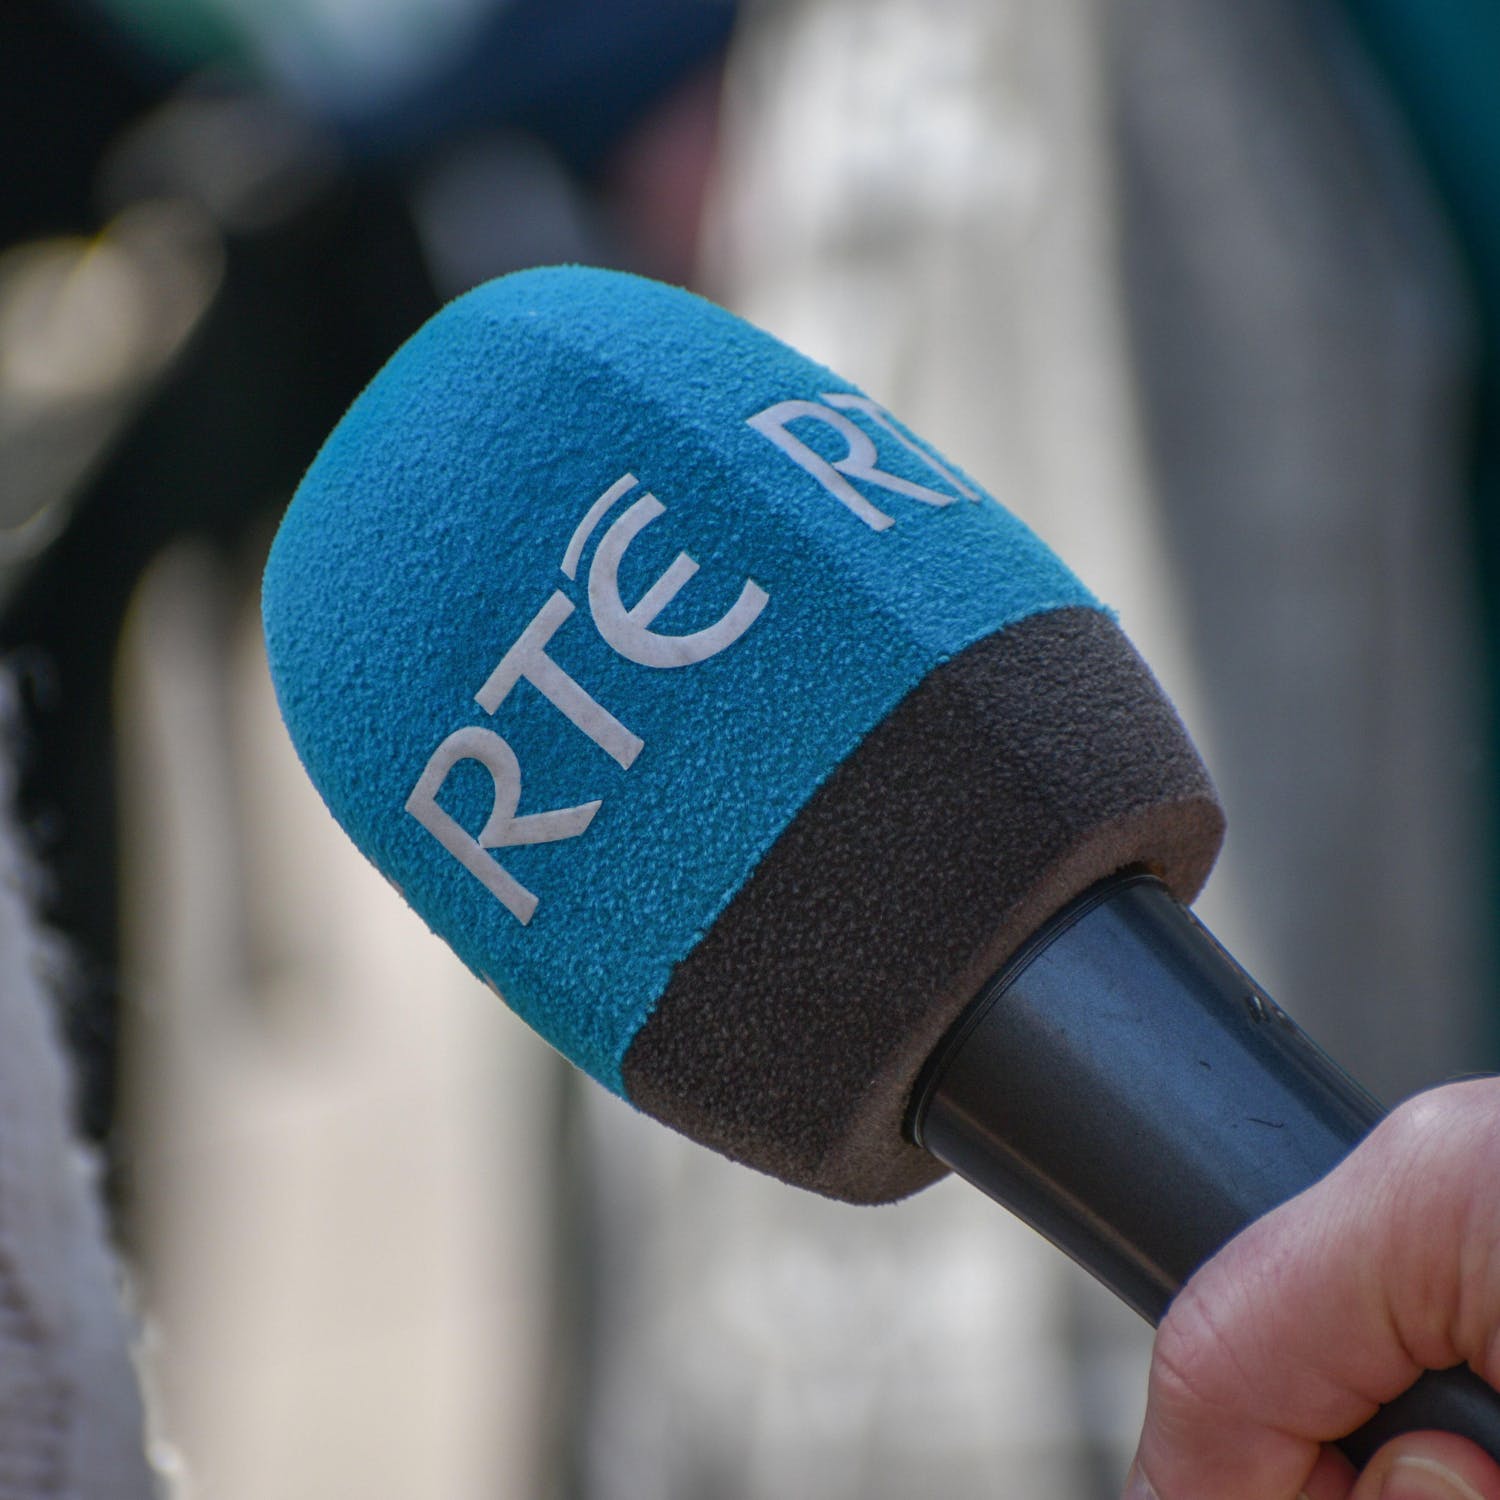 An RTÉ logo on a microphone in March 2022